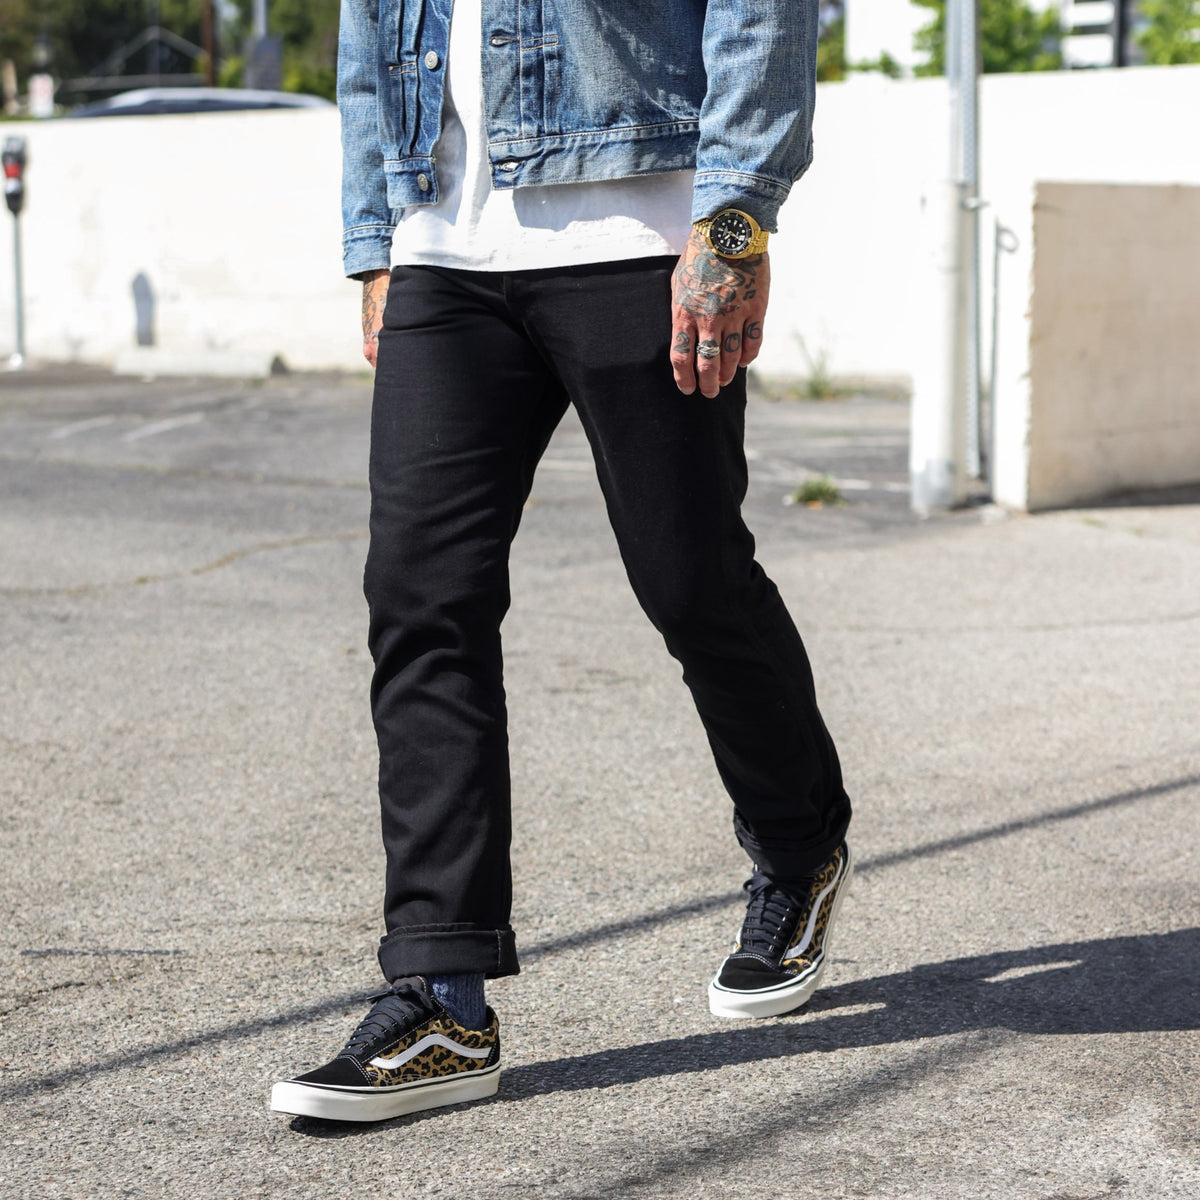 Full Count BE-1002 Narrow Straight Jean Black FINAL SALE